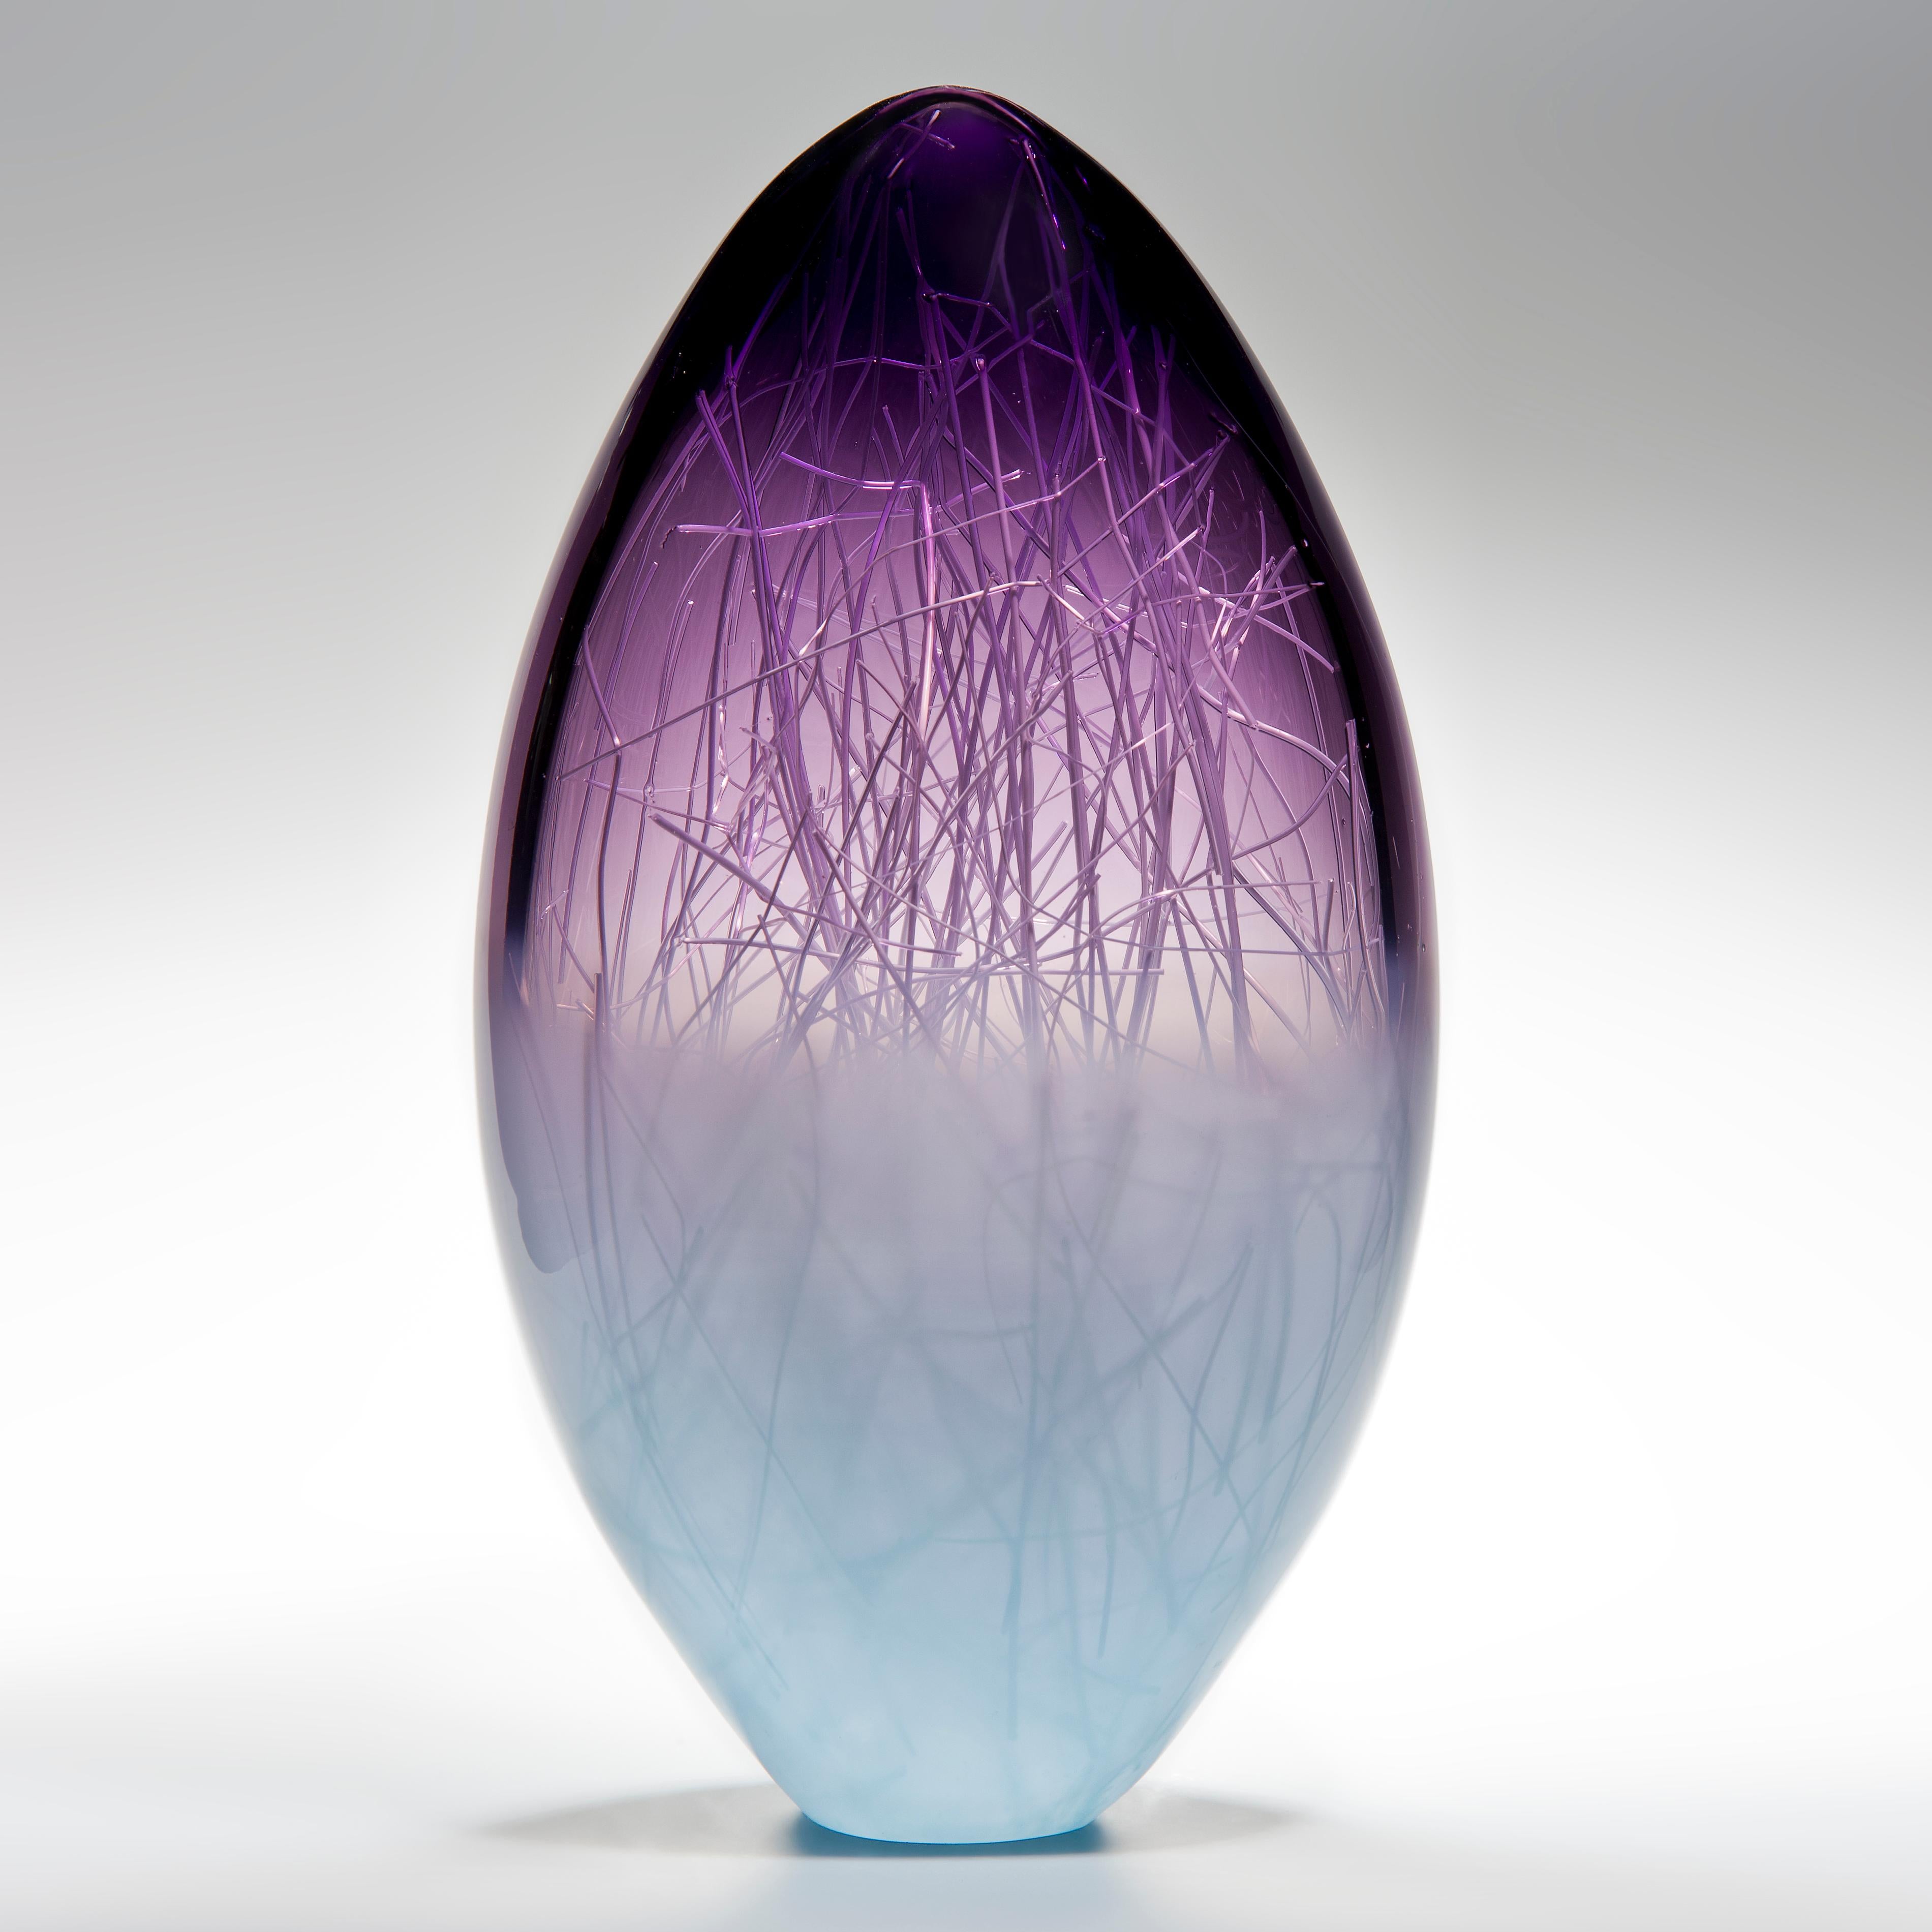 Panicum in Indigo and Pale Turquiose is a unique glass sculpture in purple and soft blue coloured glass by the collaborative artists Hanne Enemark (Danish) and Louis Thompson (British). The outer glass form contains a multitude of fine white canes